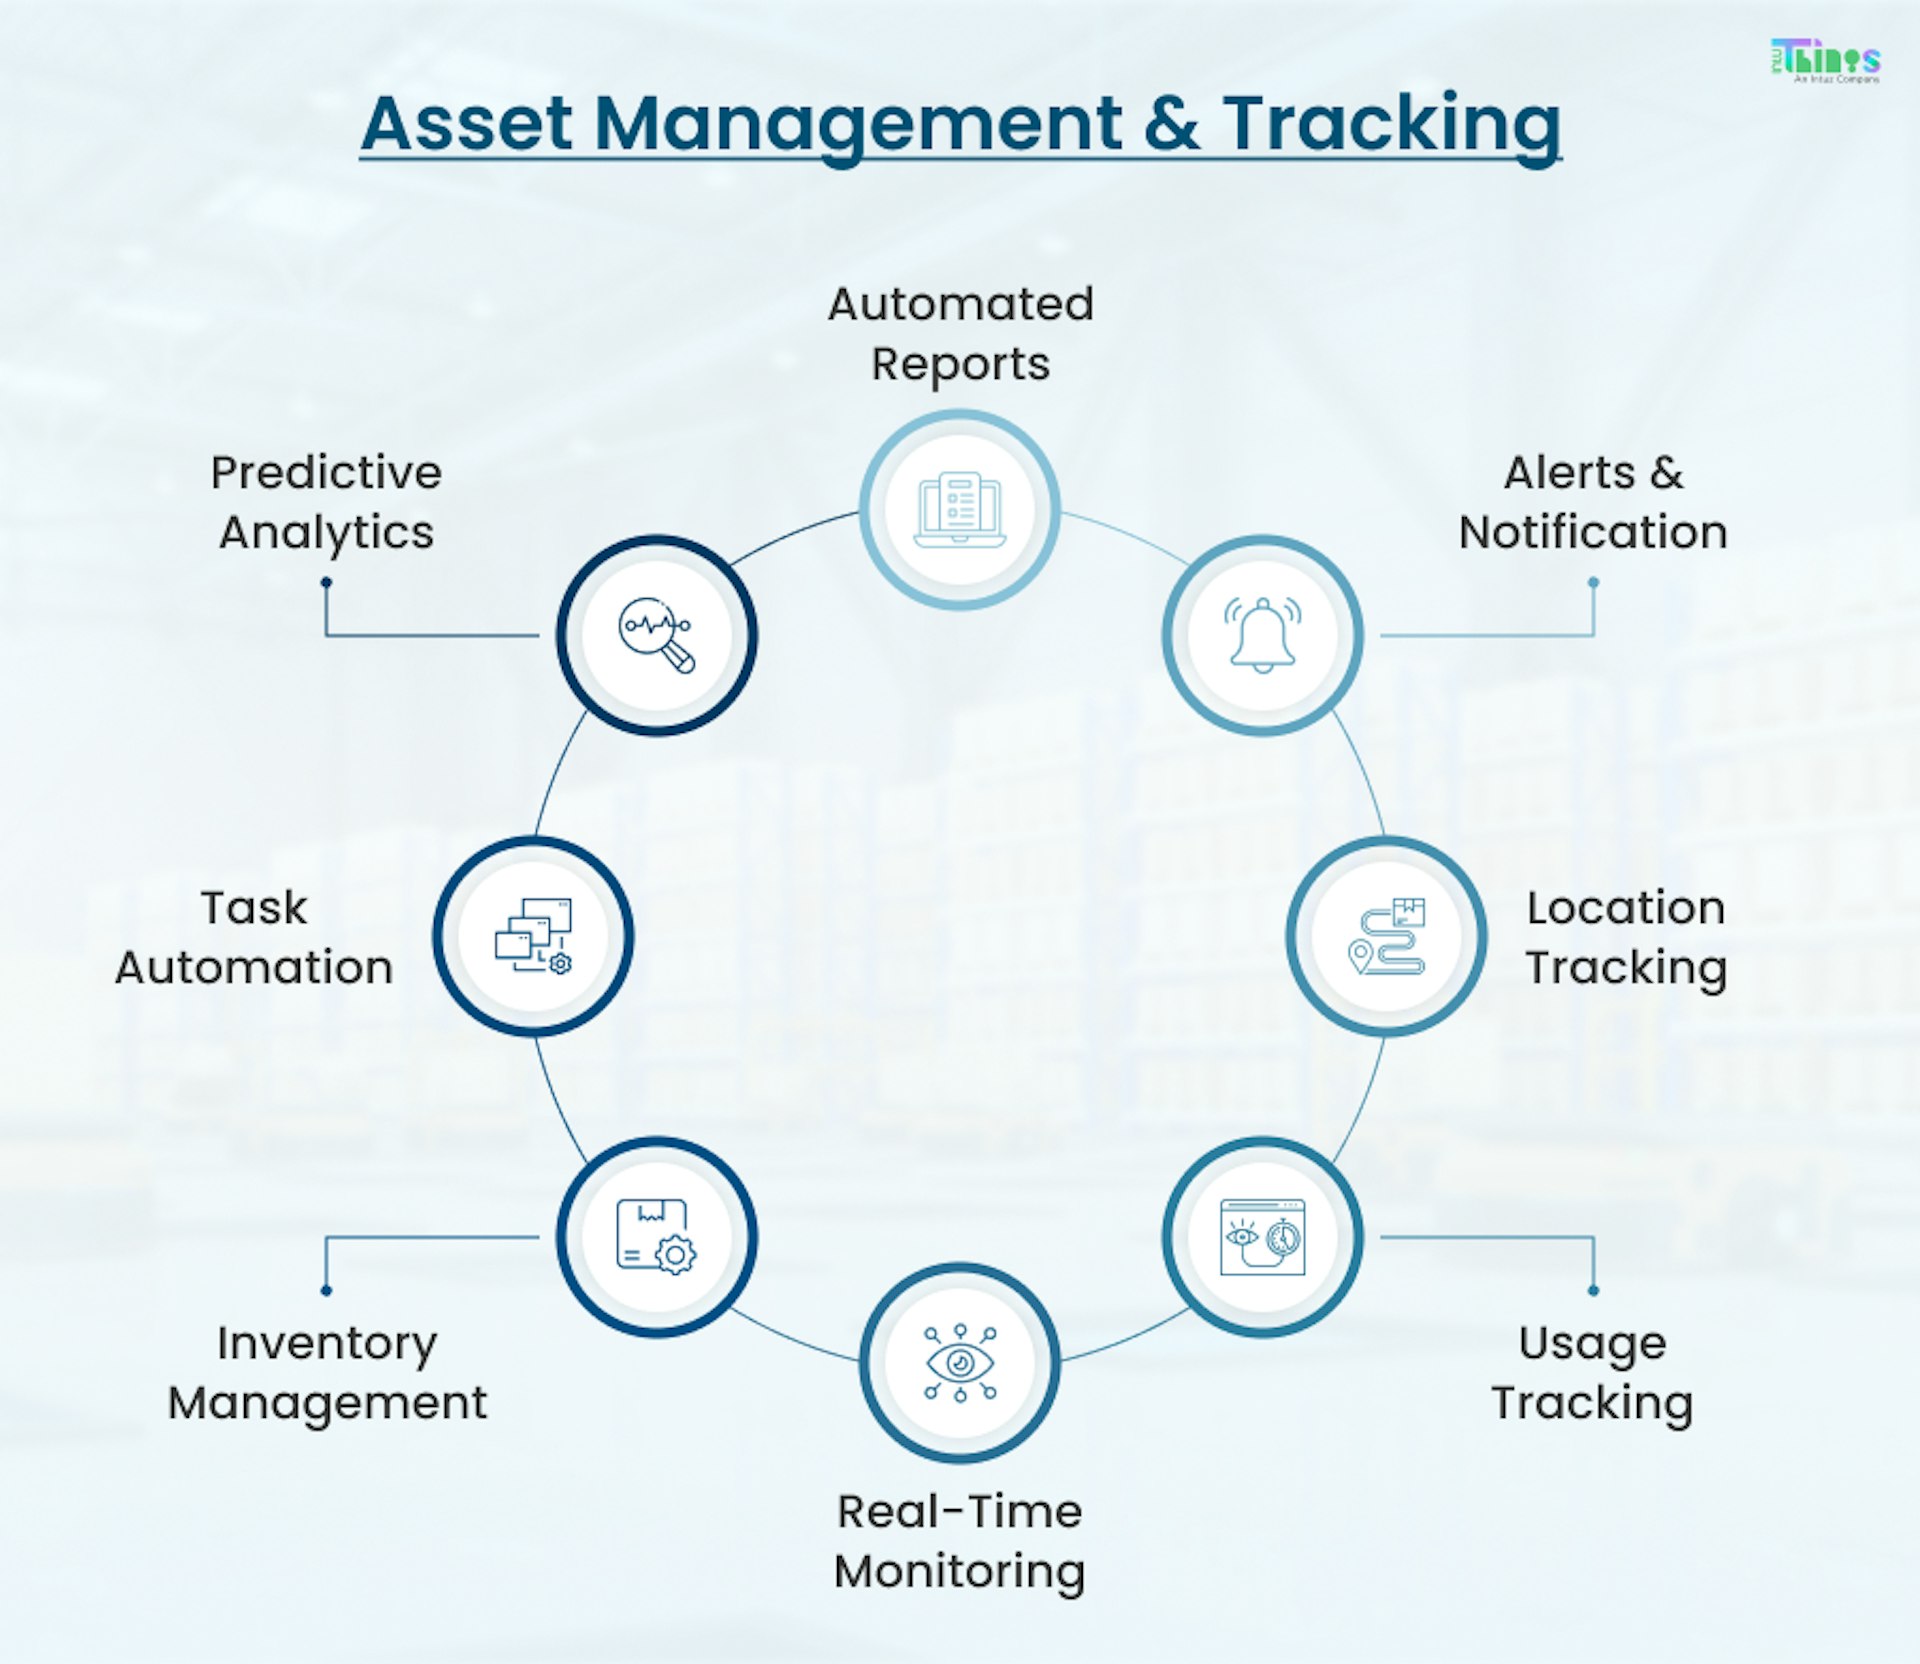 Asset management and tracking